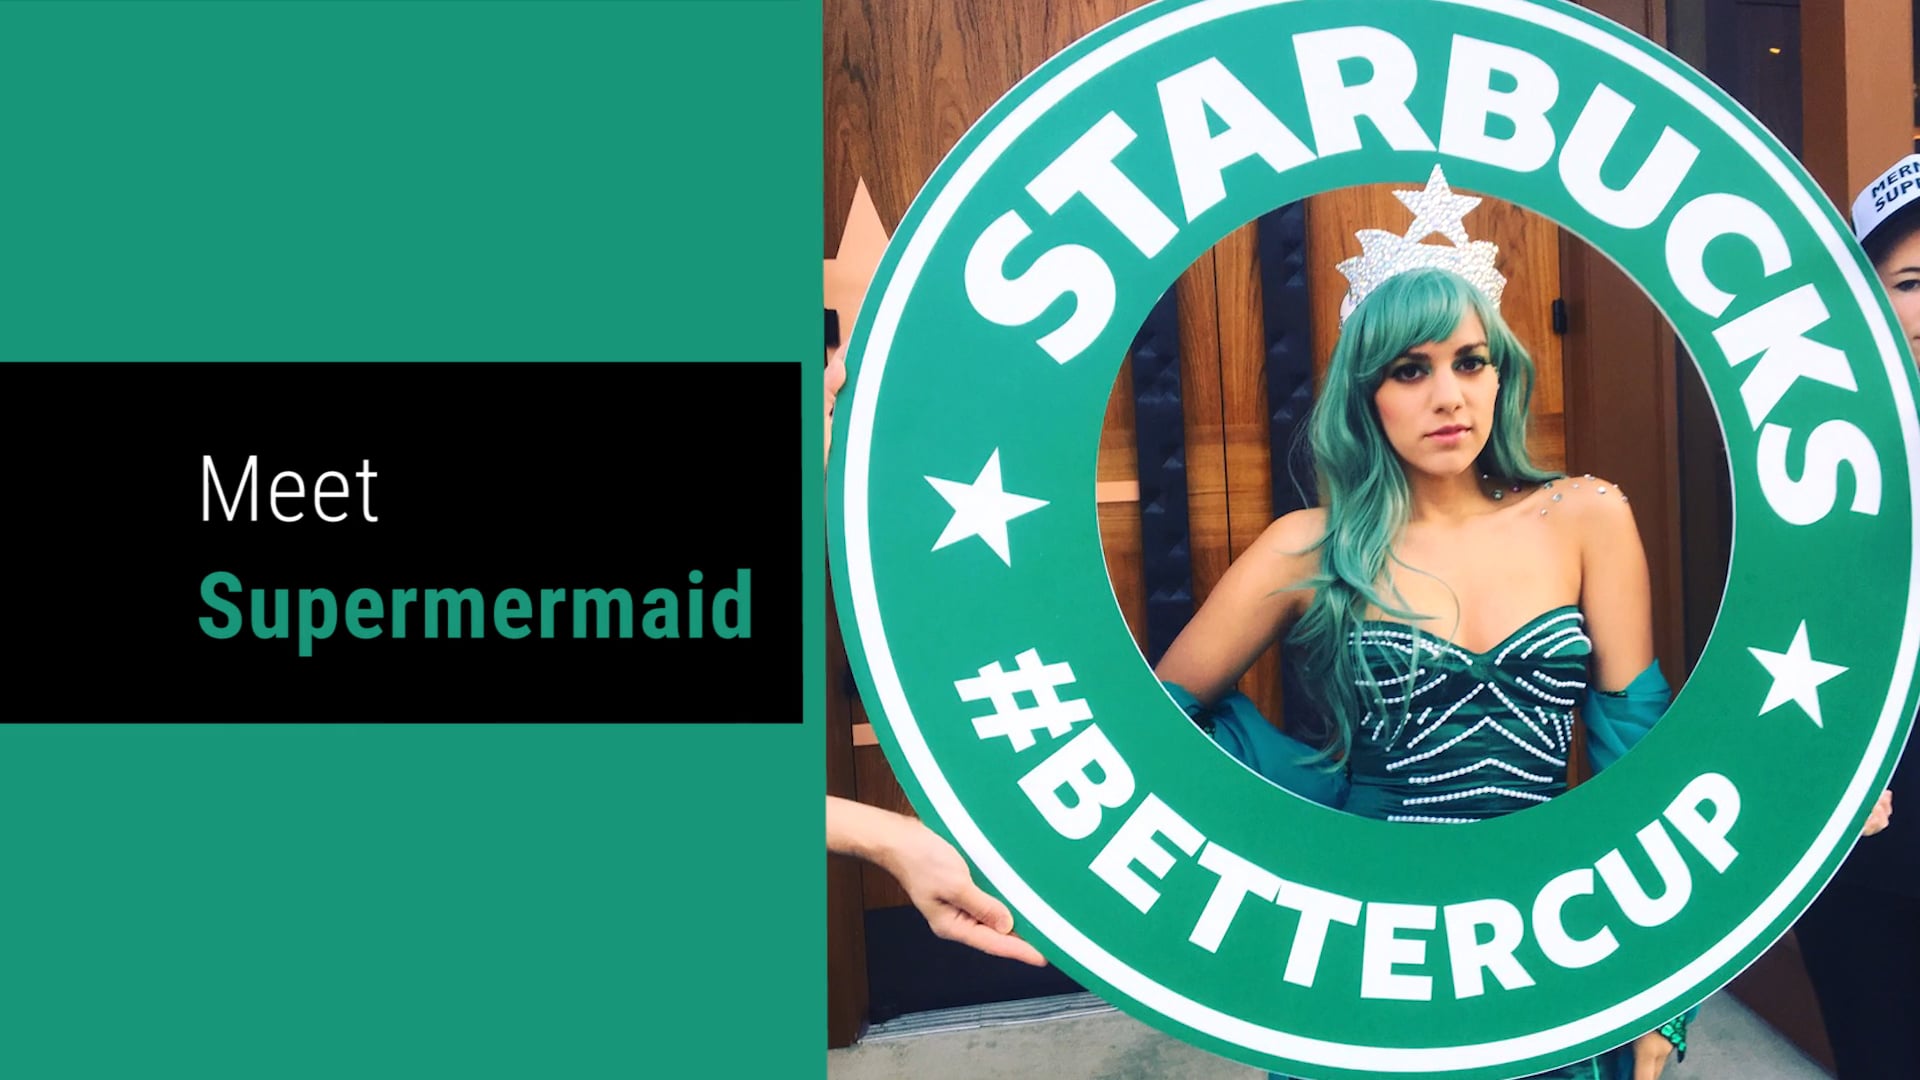 Starbucks #BetterCup Campaign Call for Volunteers